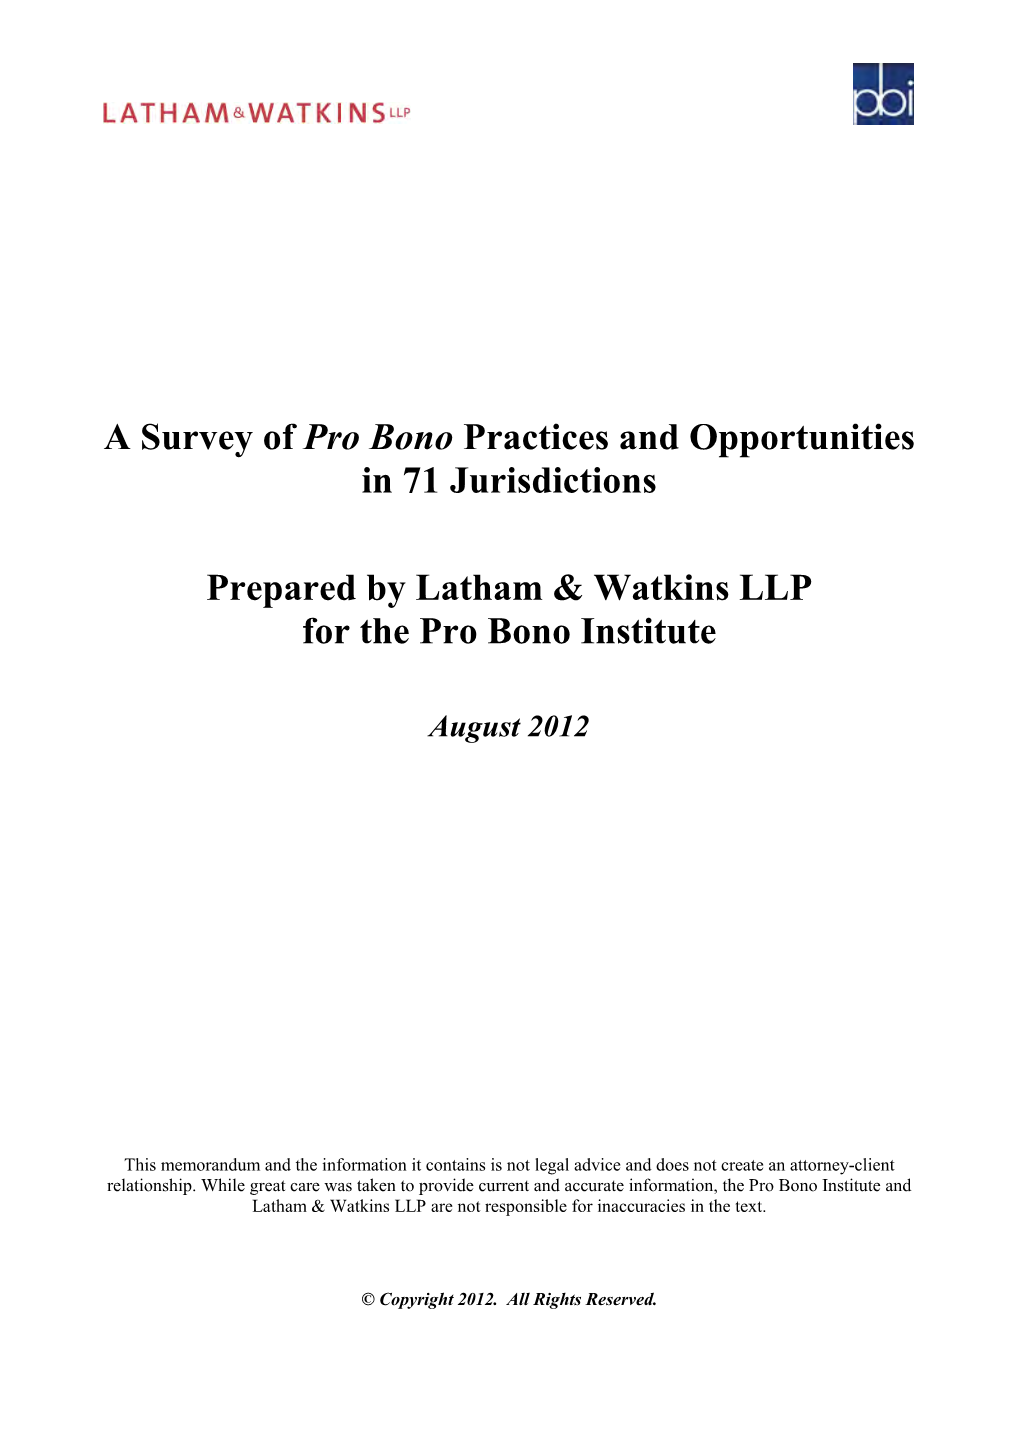 A Survey of Pro Bono Practices and Opportunities in 71 Jurisdictions